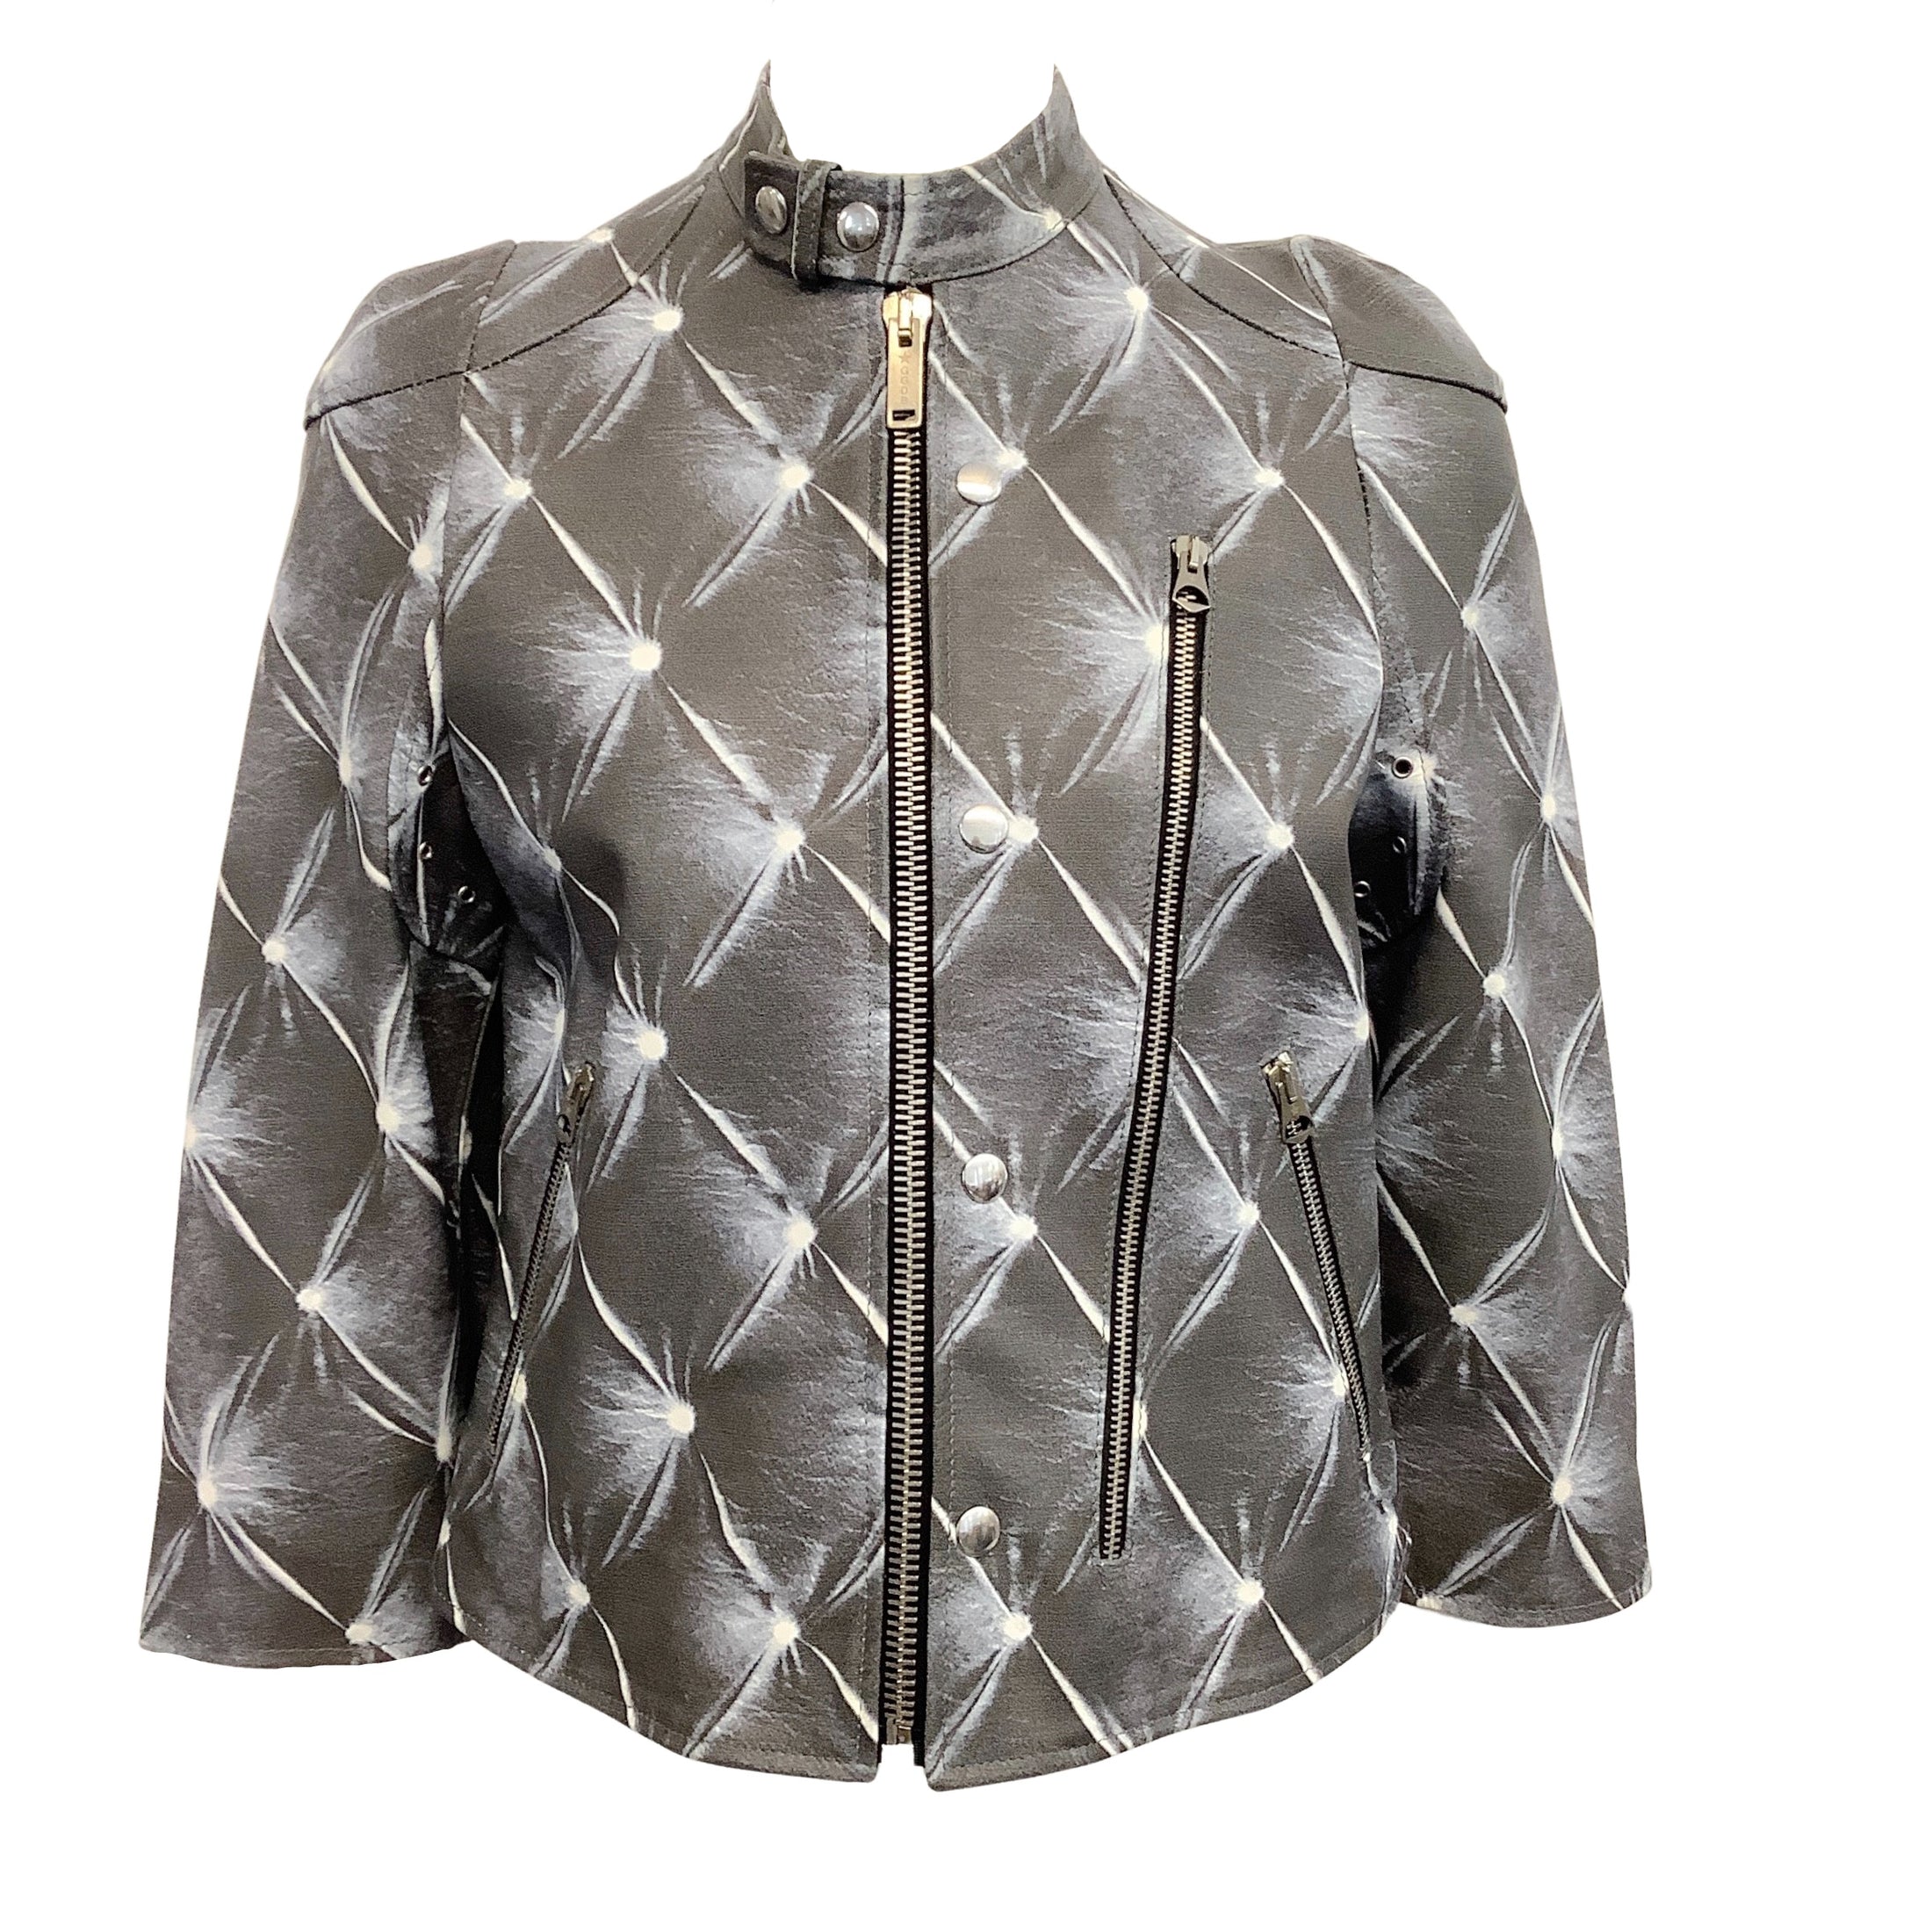 Golden Goose Deluxe Brand Chester Leather Alma Jacket